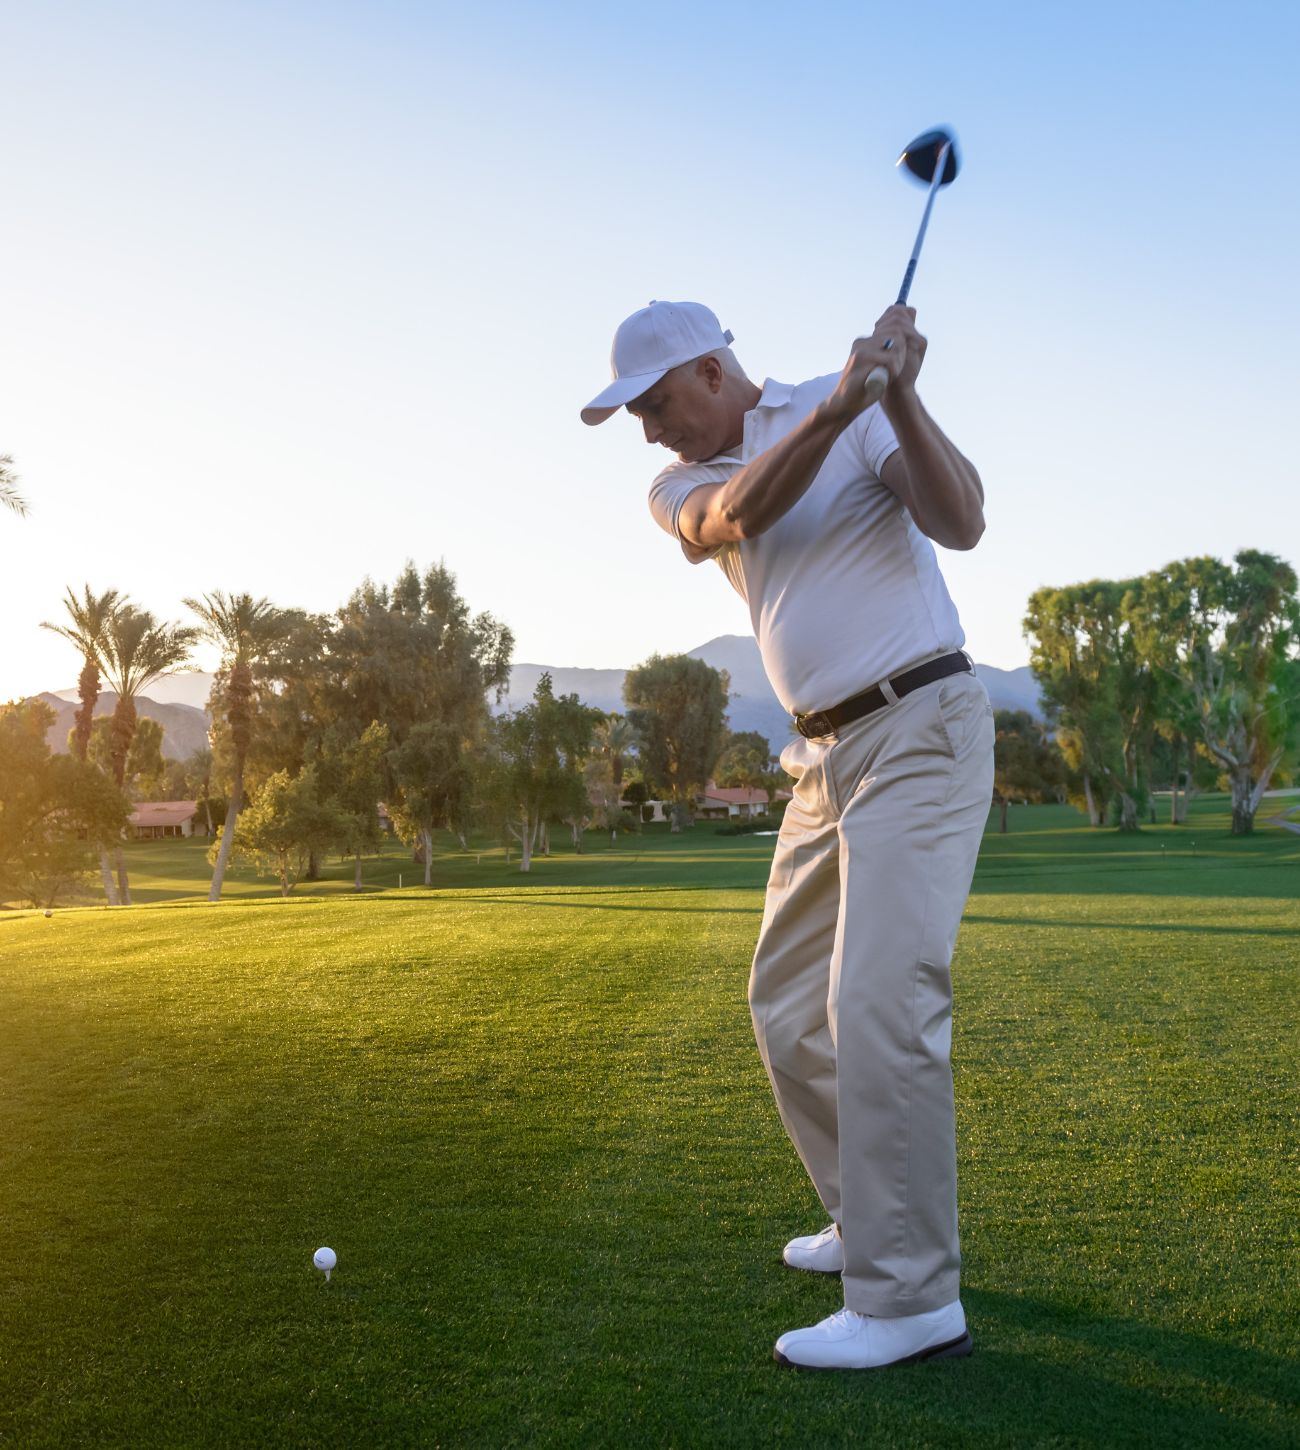 Photo of a man on a golf course on a sunny morning, about to hit the ball from the tee.